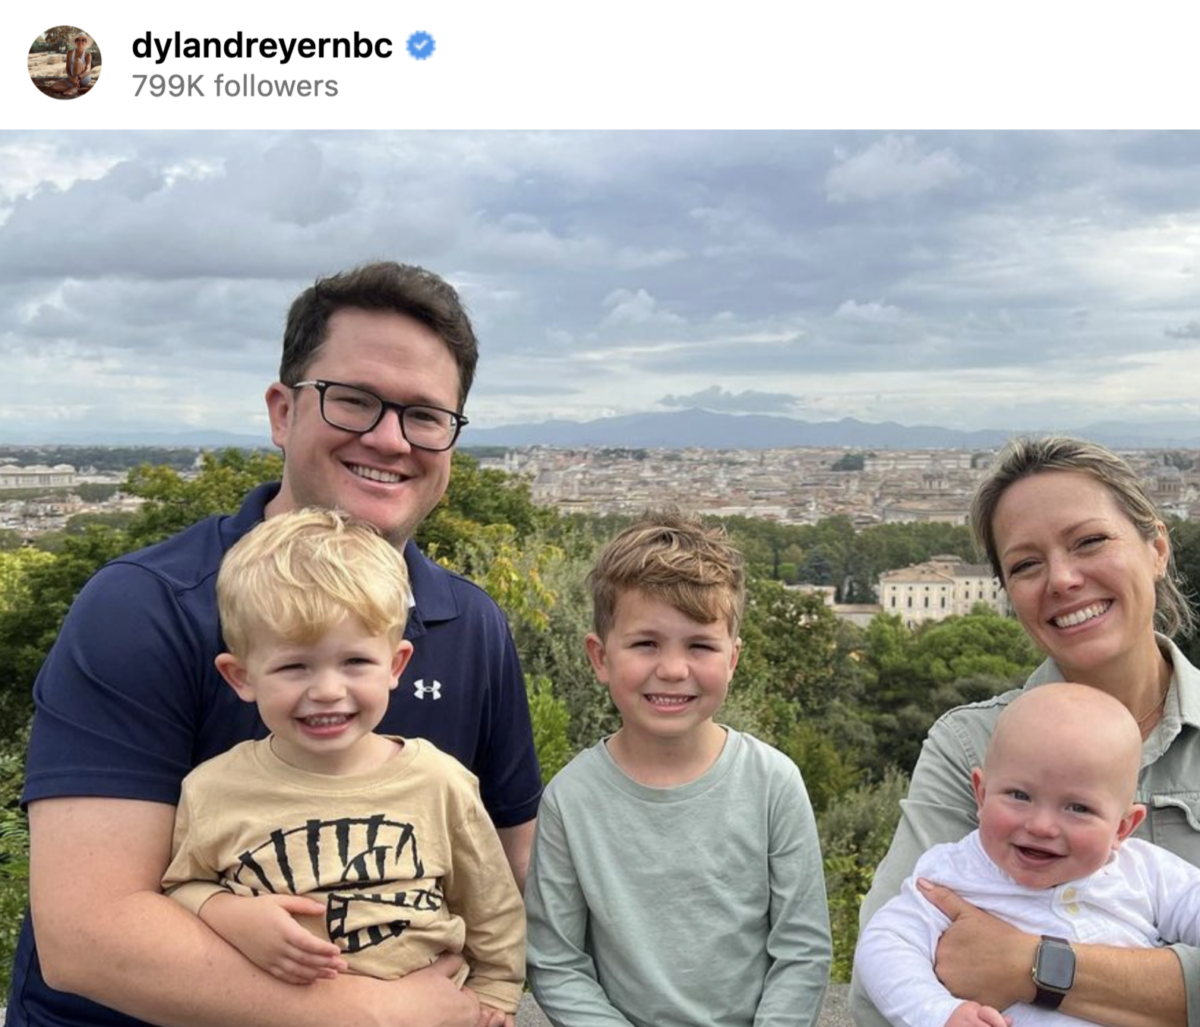 Dylan Dreyer Says It's More Efficient to Shower With Her Three Kids | Today Show host and meteorologist Dylan Dreyer is opening up about her “efficient” parenting techniques, specifically when it comes to bath time.